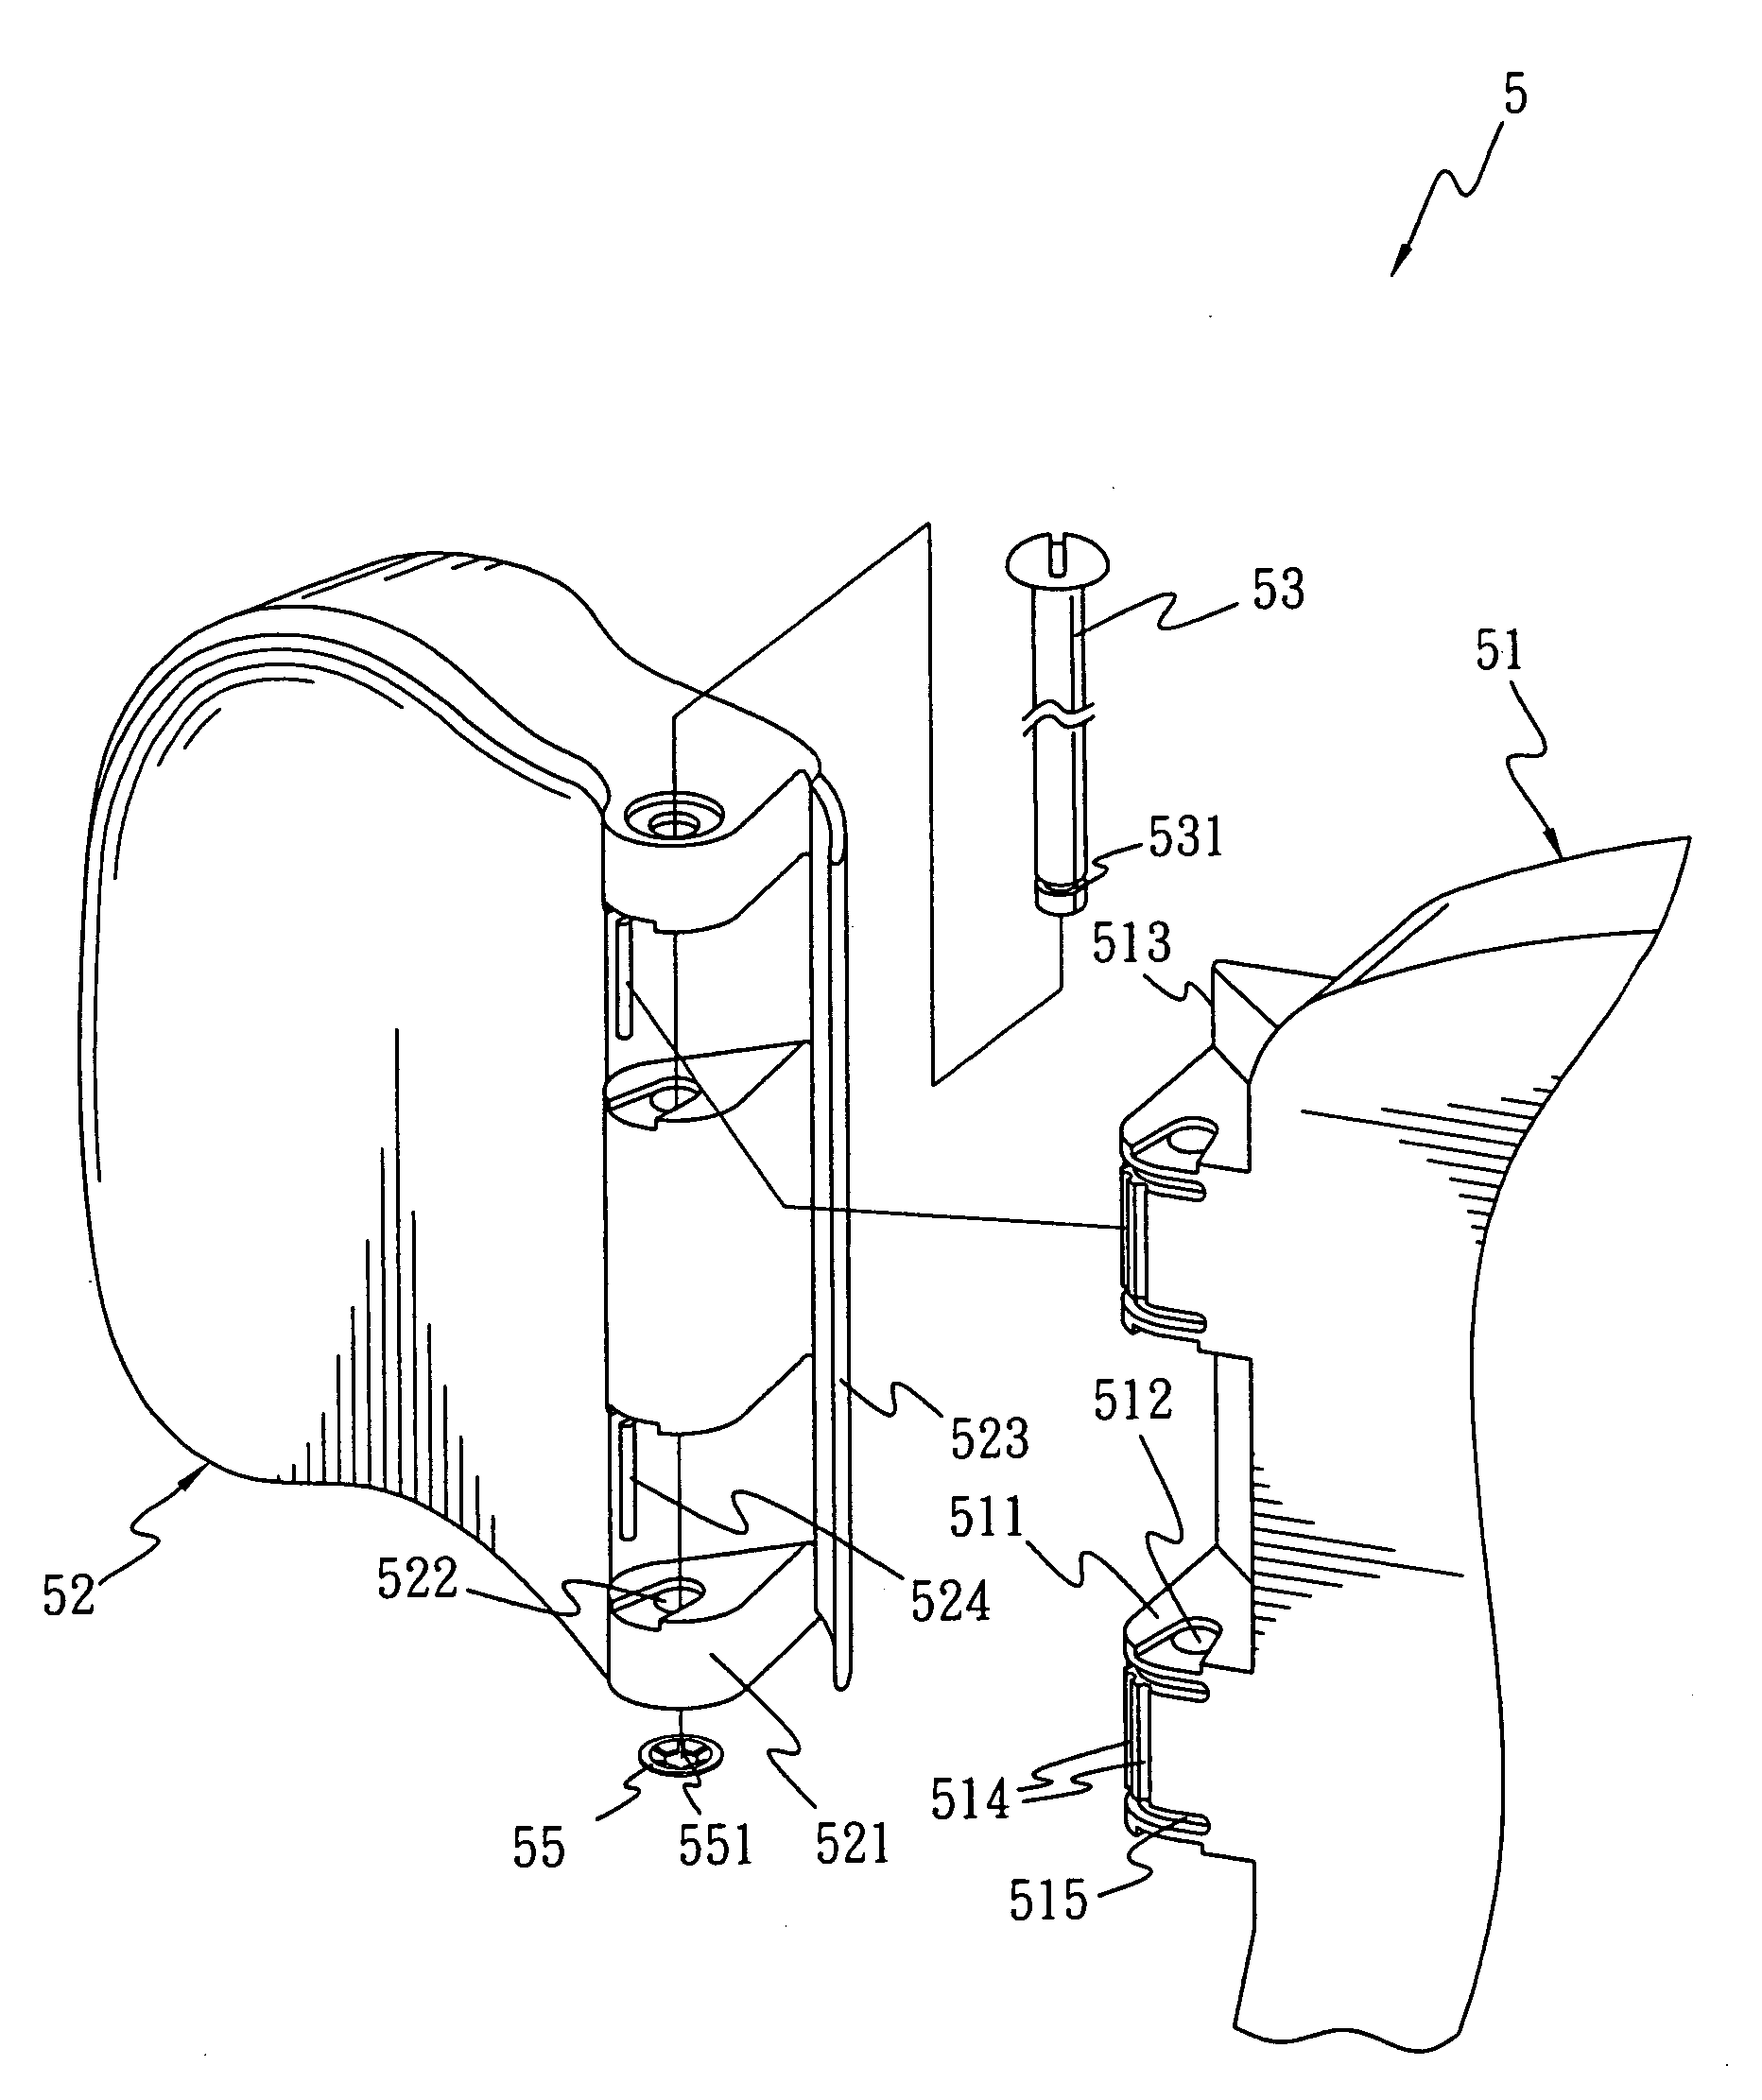 Child car seat device with wing components